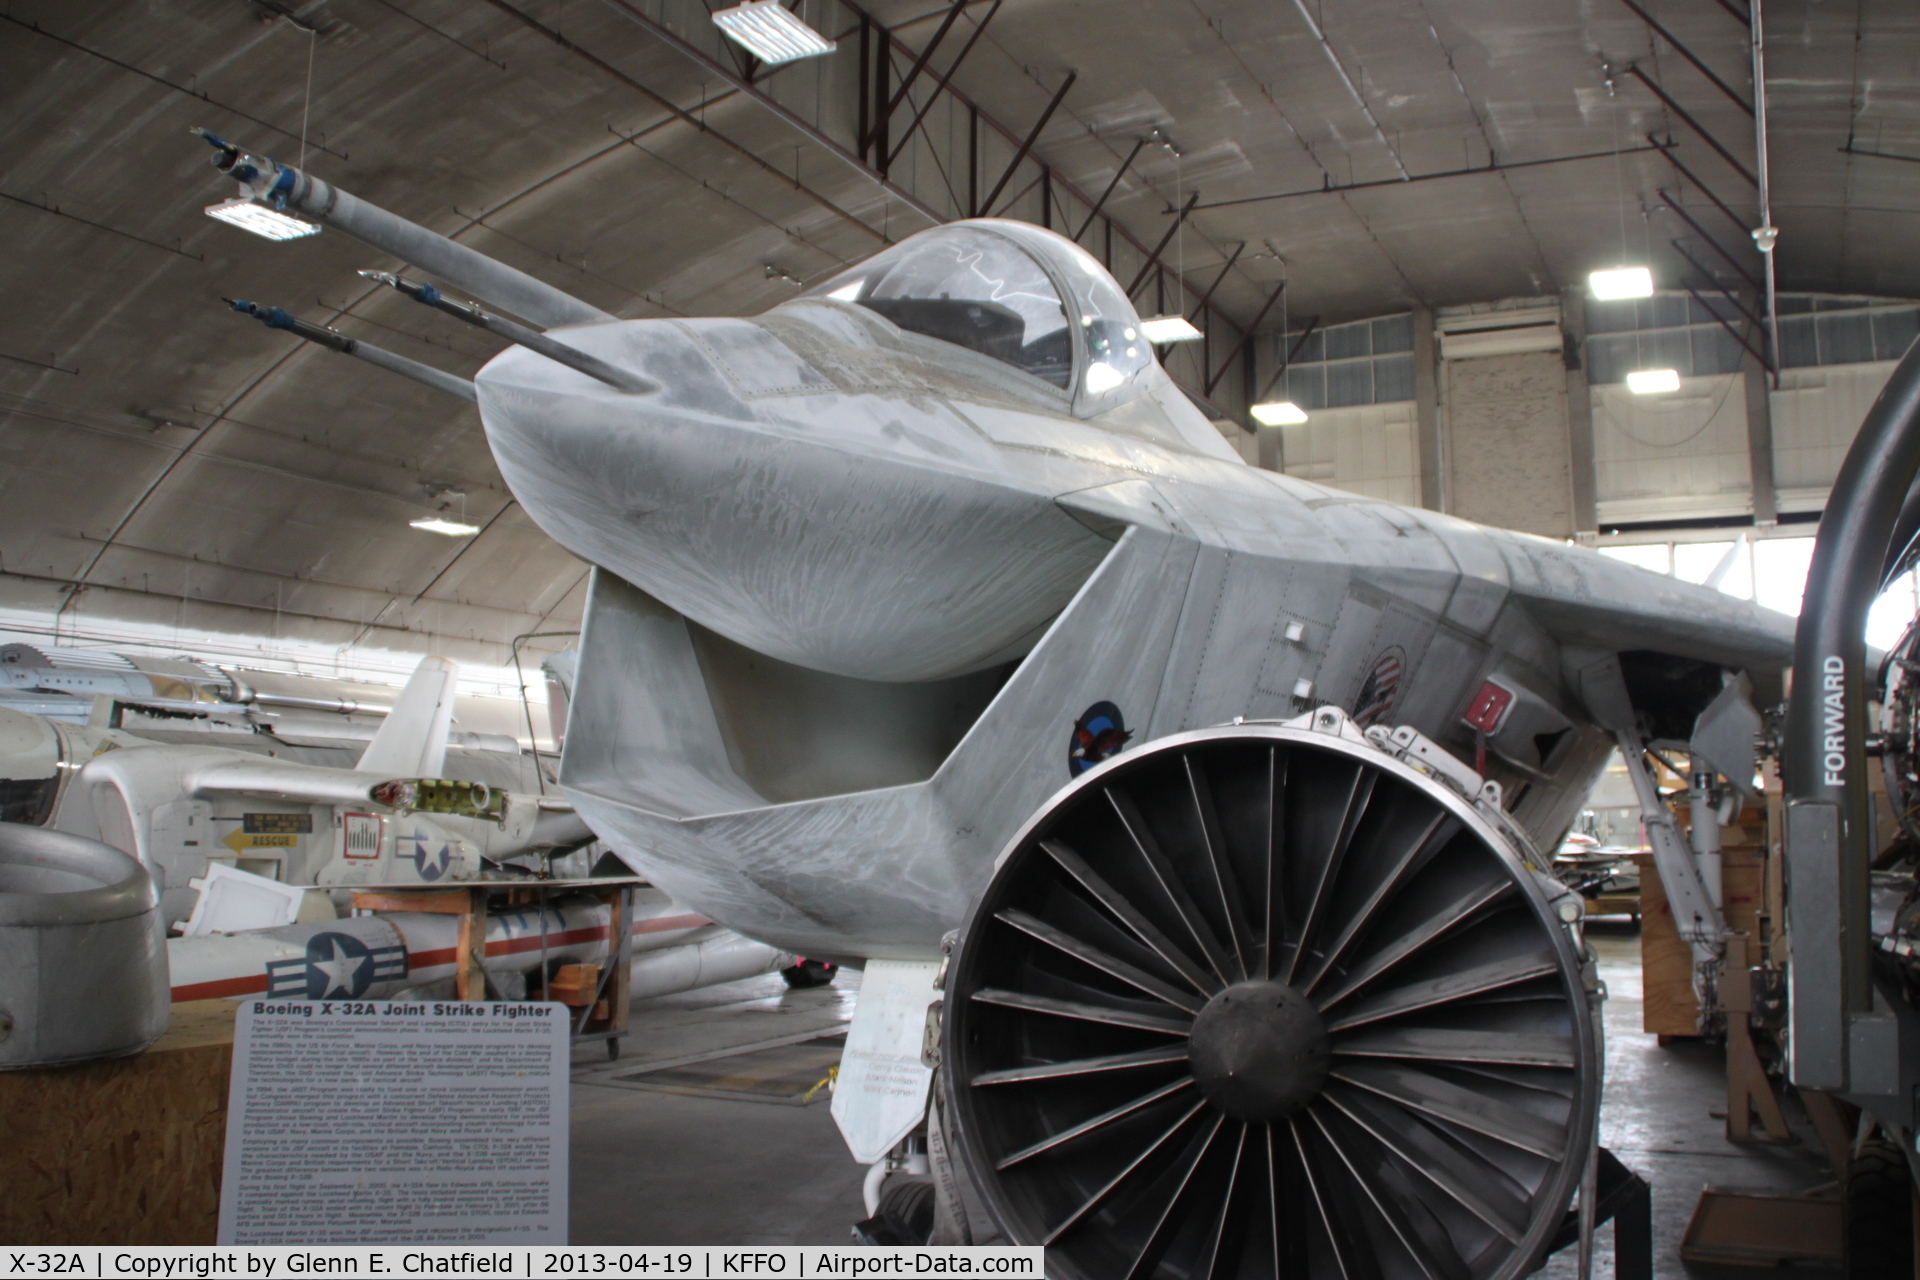 X-32A, 2000 Boeing Joint Strike Fighter C/N CDA1, In the restoration facility